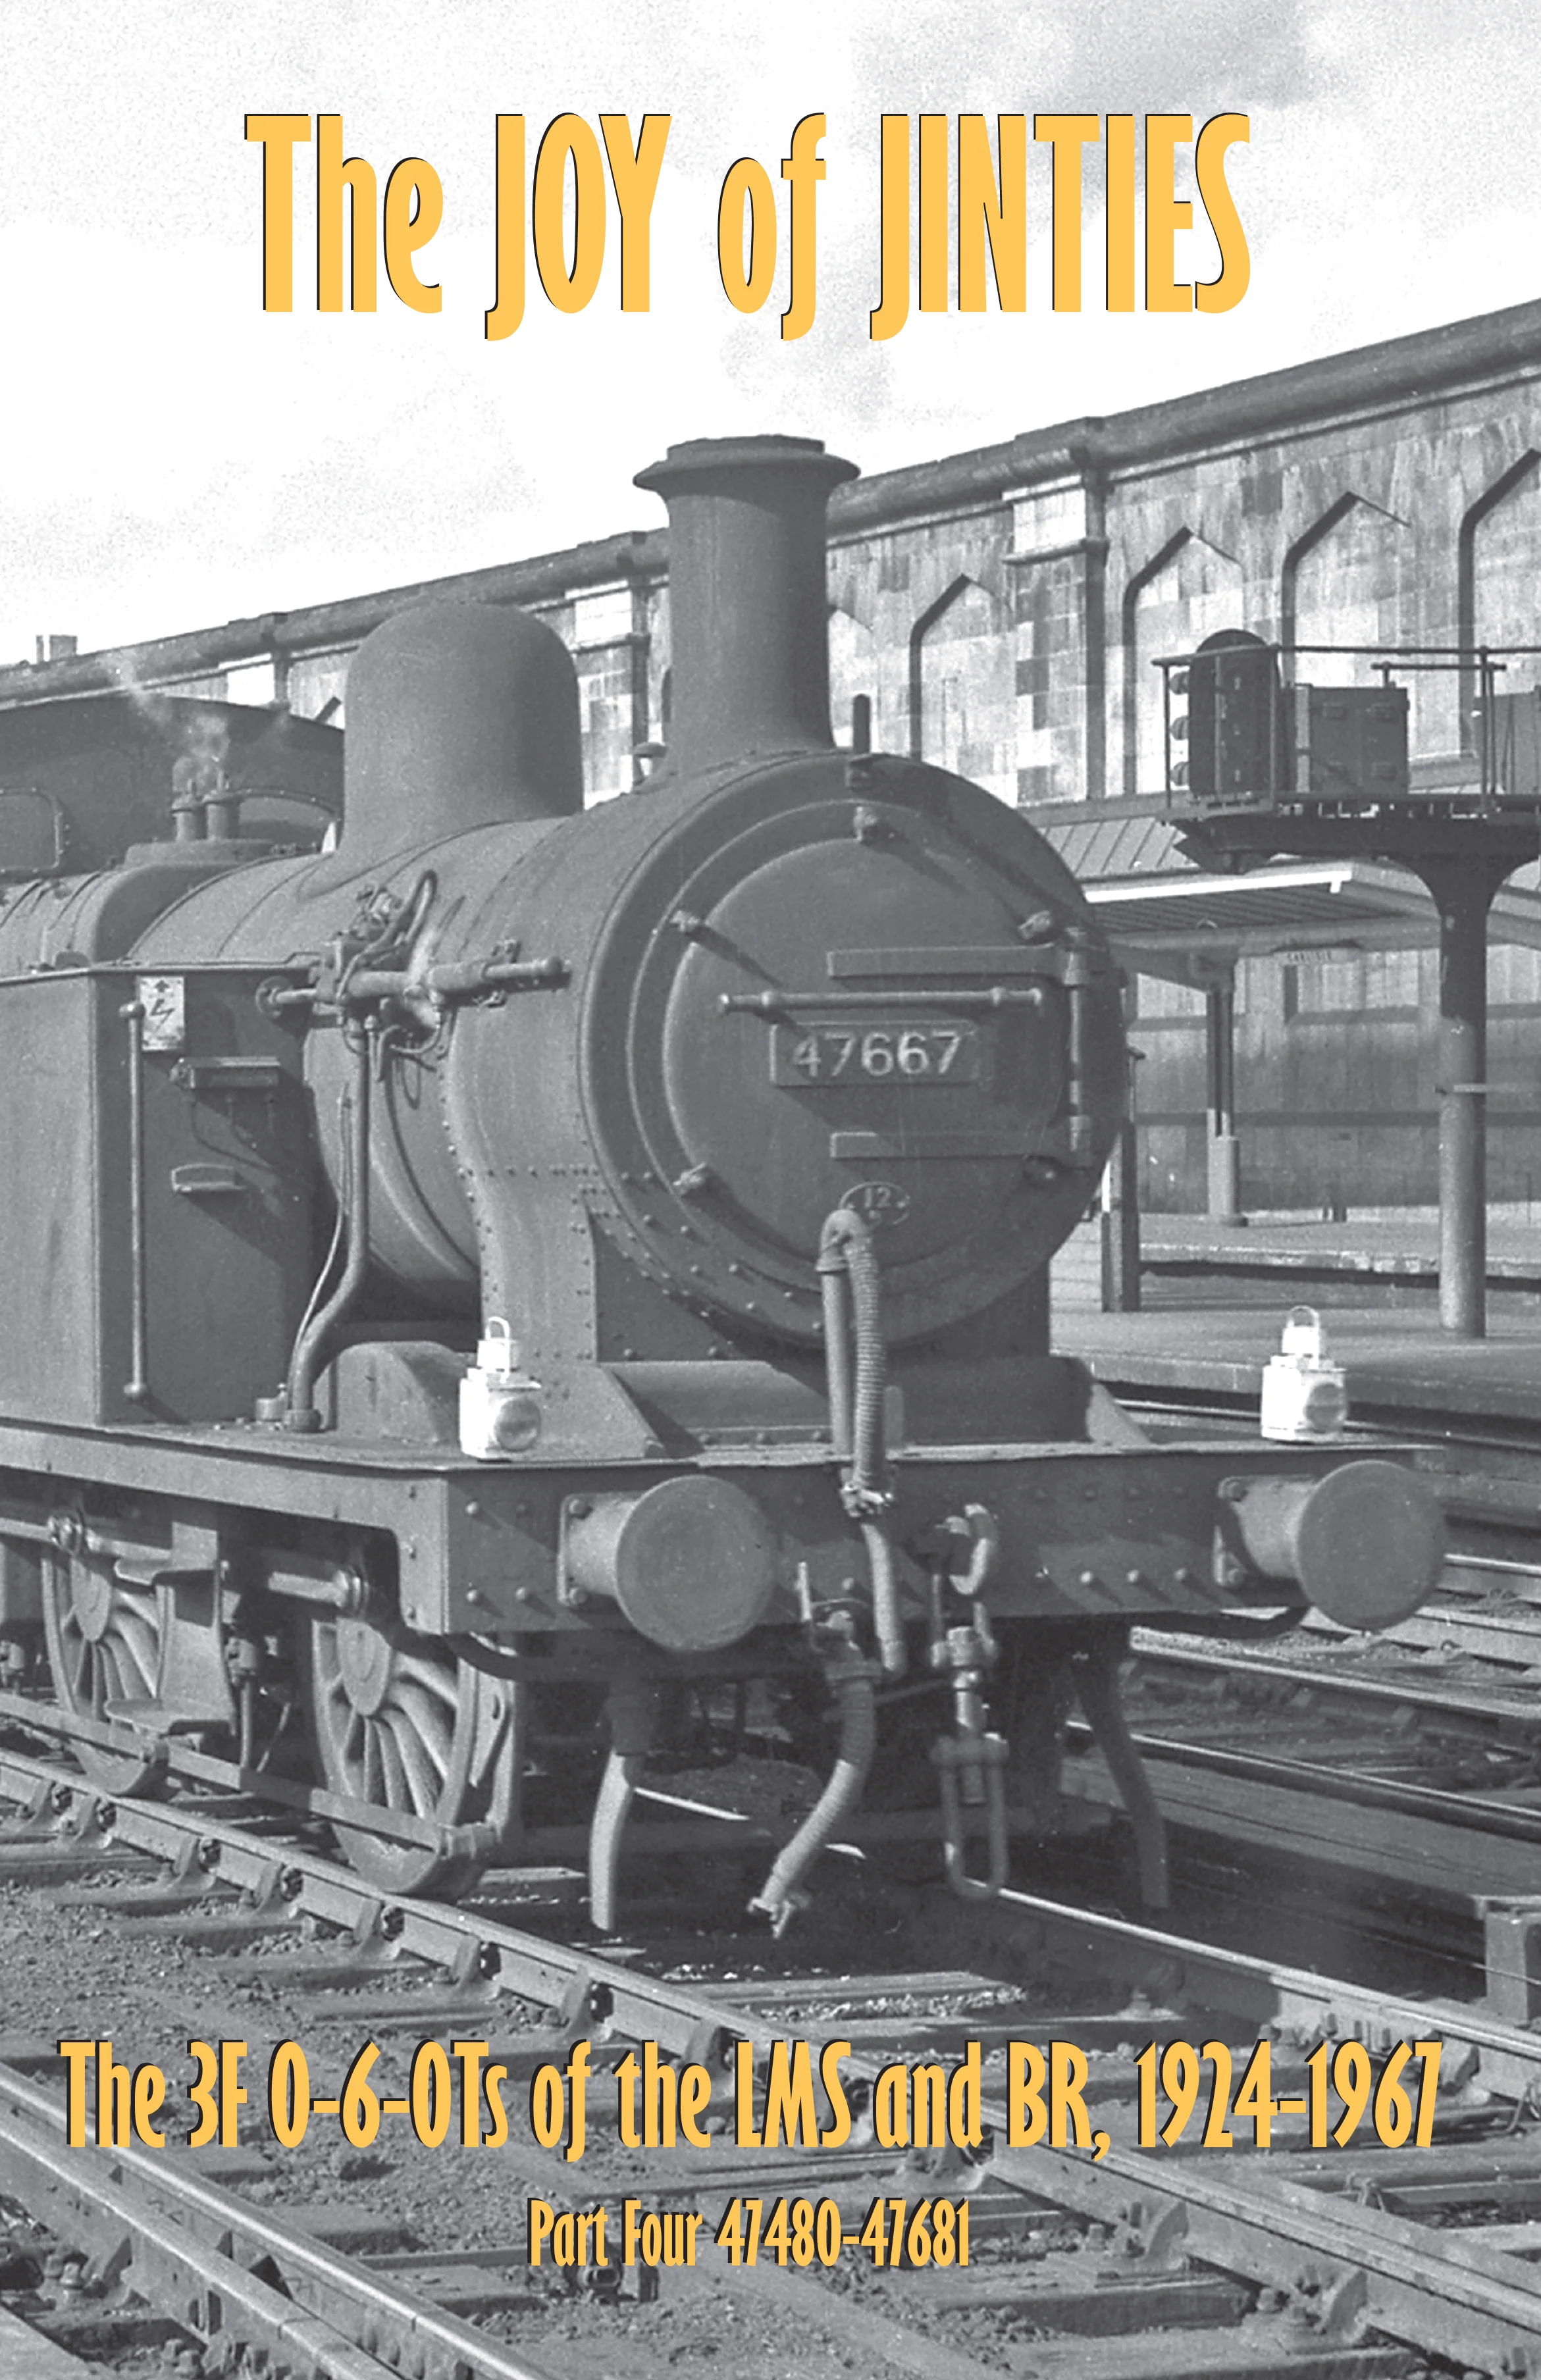 The Joy of Jinties: The 3F 0-6-0Ts of the LMS and BR, 1924-1967 Part 4: 47580-47681